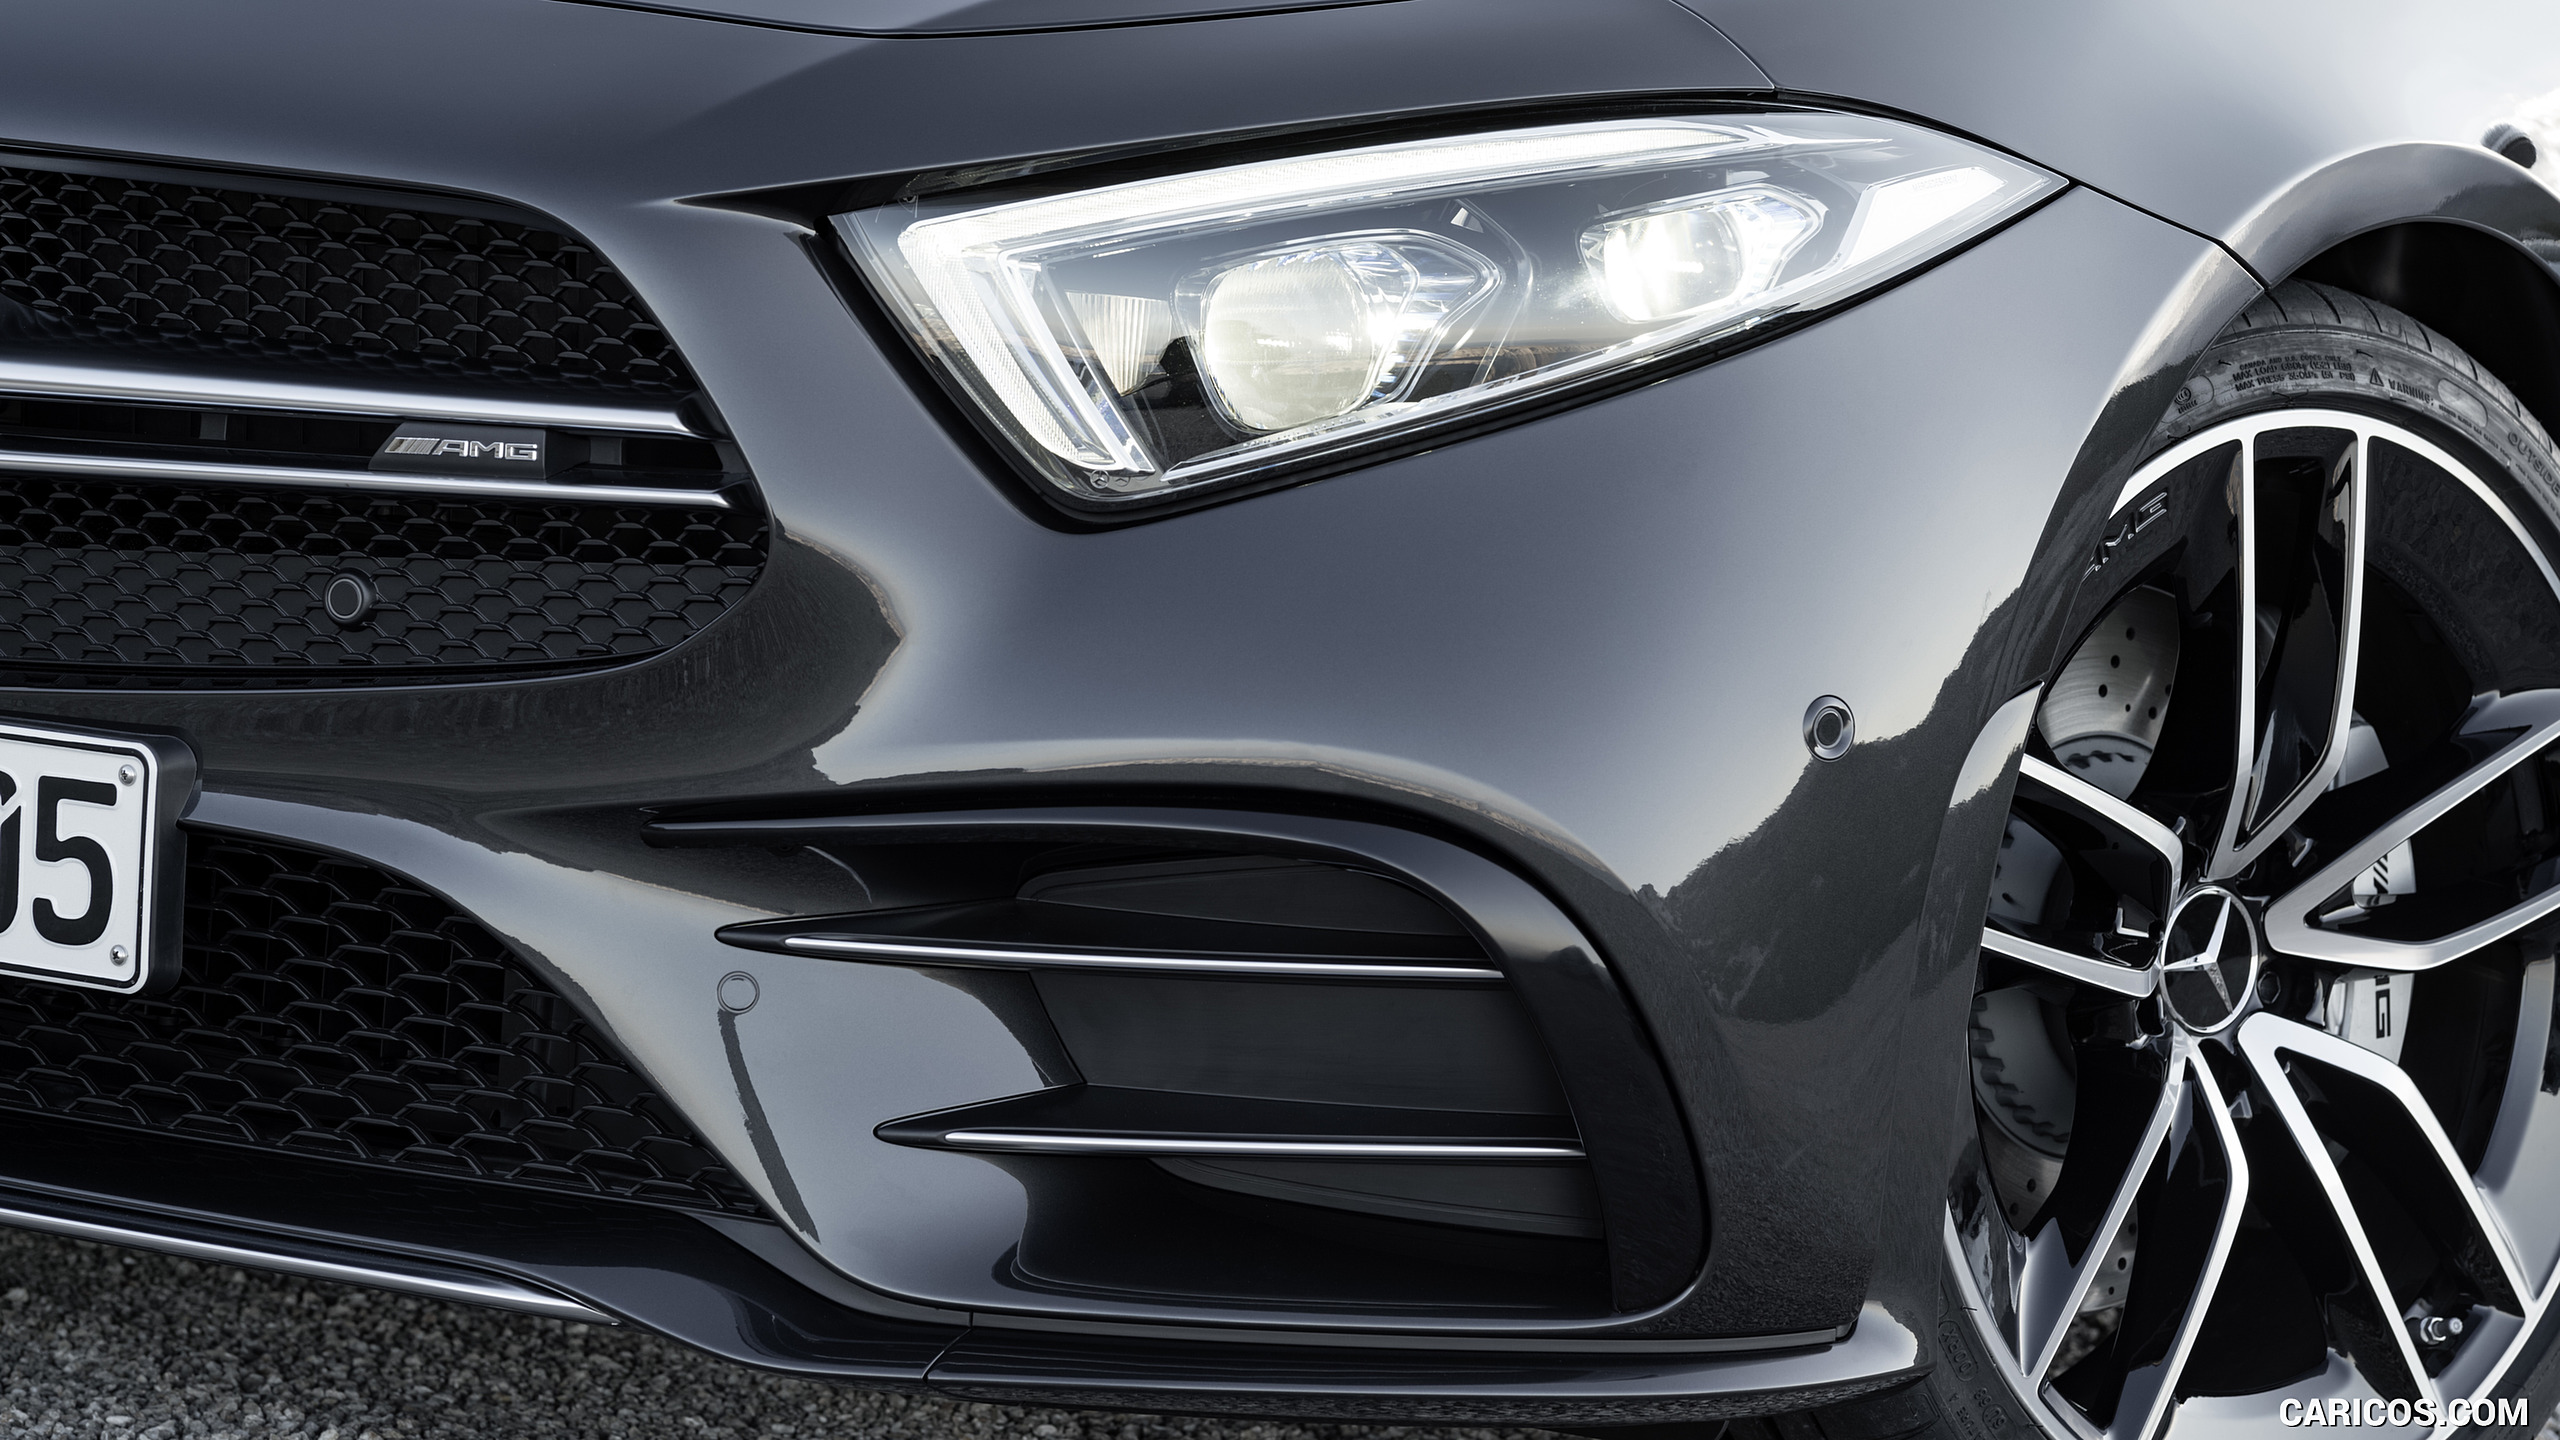 2019 Mercedes-AMG CLS 53 4MATIC+ - Headlight, #15 of 84